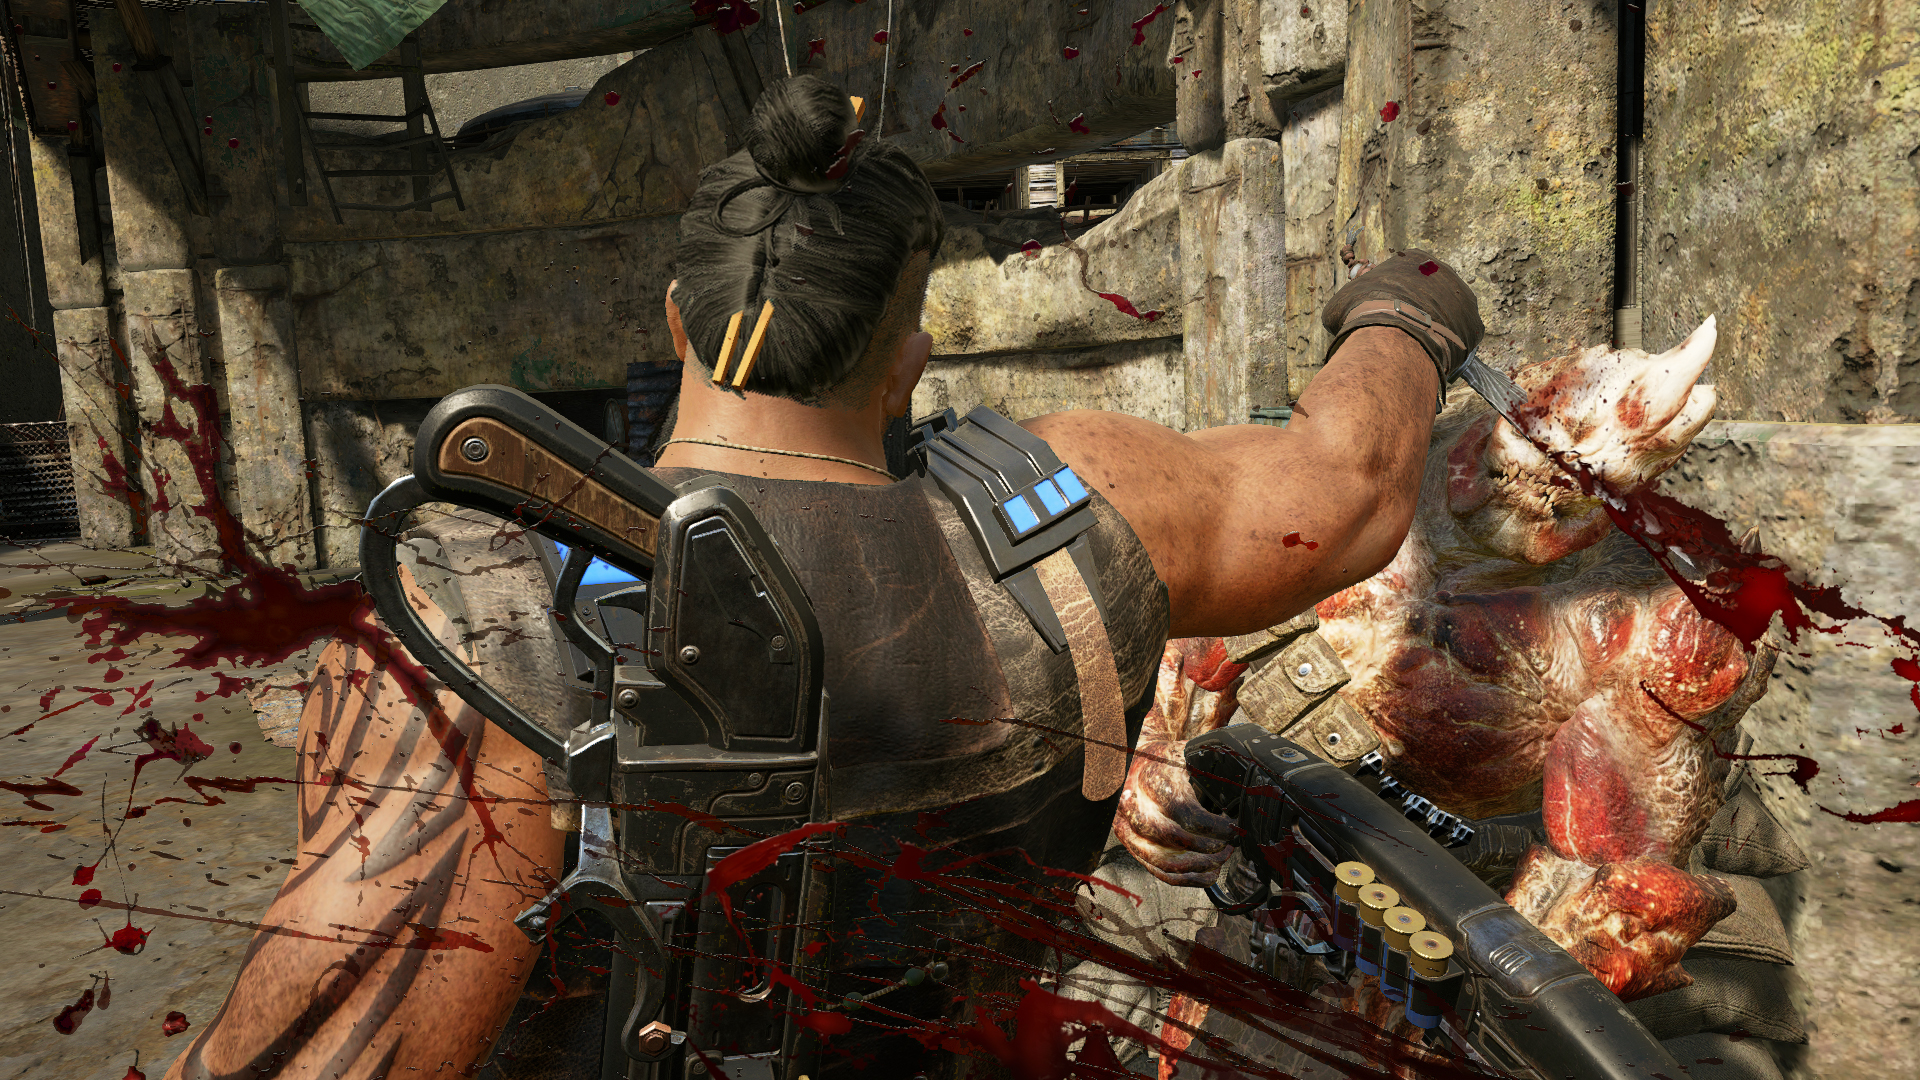 &#039;Gears of War 4&#039; multiplayer brings the series back to its roots